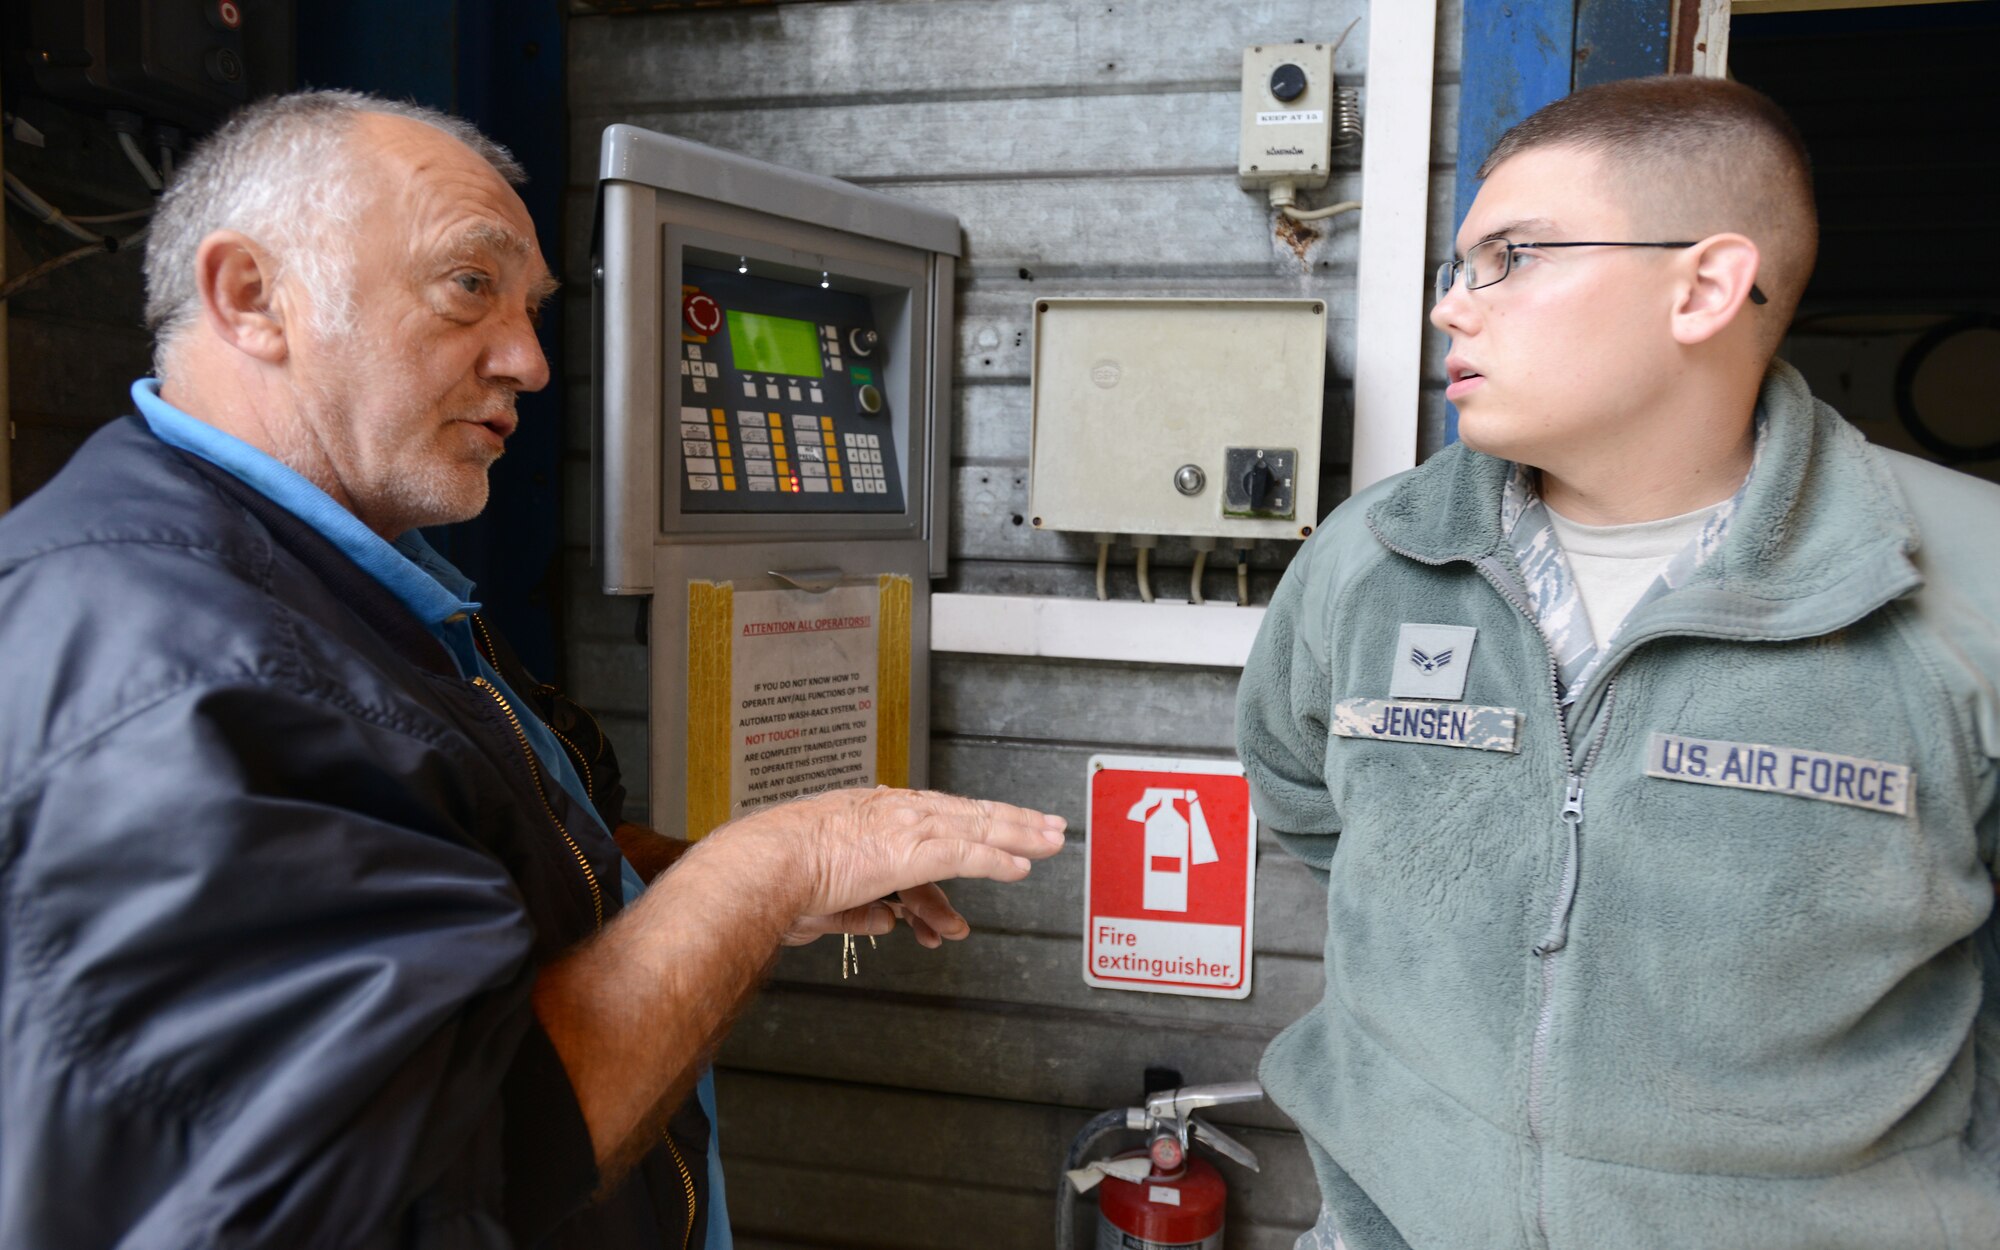 Guenter Spletter explains the wash rack operating controls to Senior Airman Matthew Jensen, both 86th Vehicle Readiness Squadron vehicle operators, at Ramstein Air Base, Germany, Sept. 12, 2014. If not operated correctly, patrons could potentially damage the wash rack system or a government motor vehicle, stopping both items from being used to support the local mission. (U.S. Air Force photo/Senior Airman Timothy Moore)